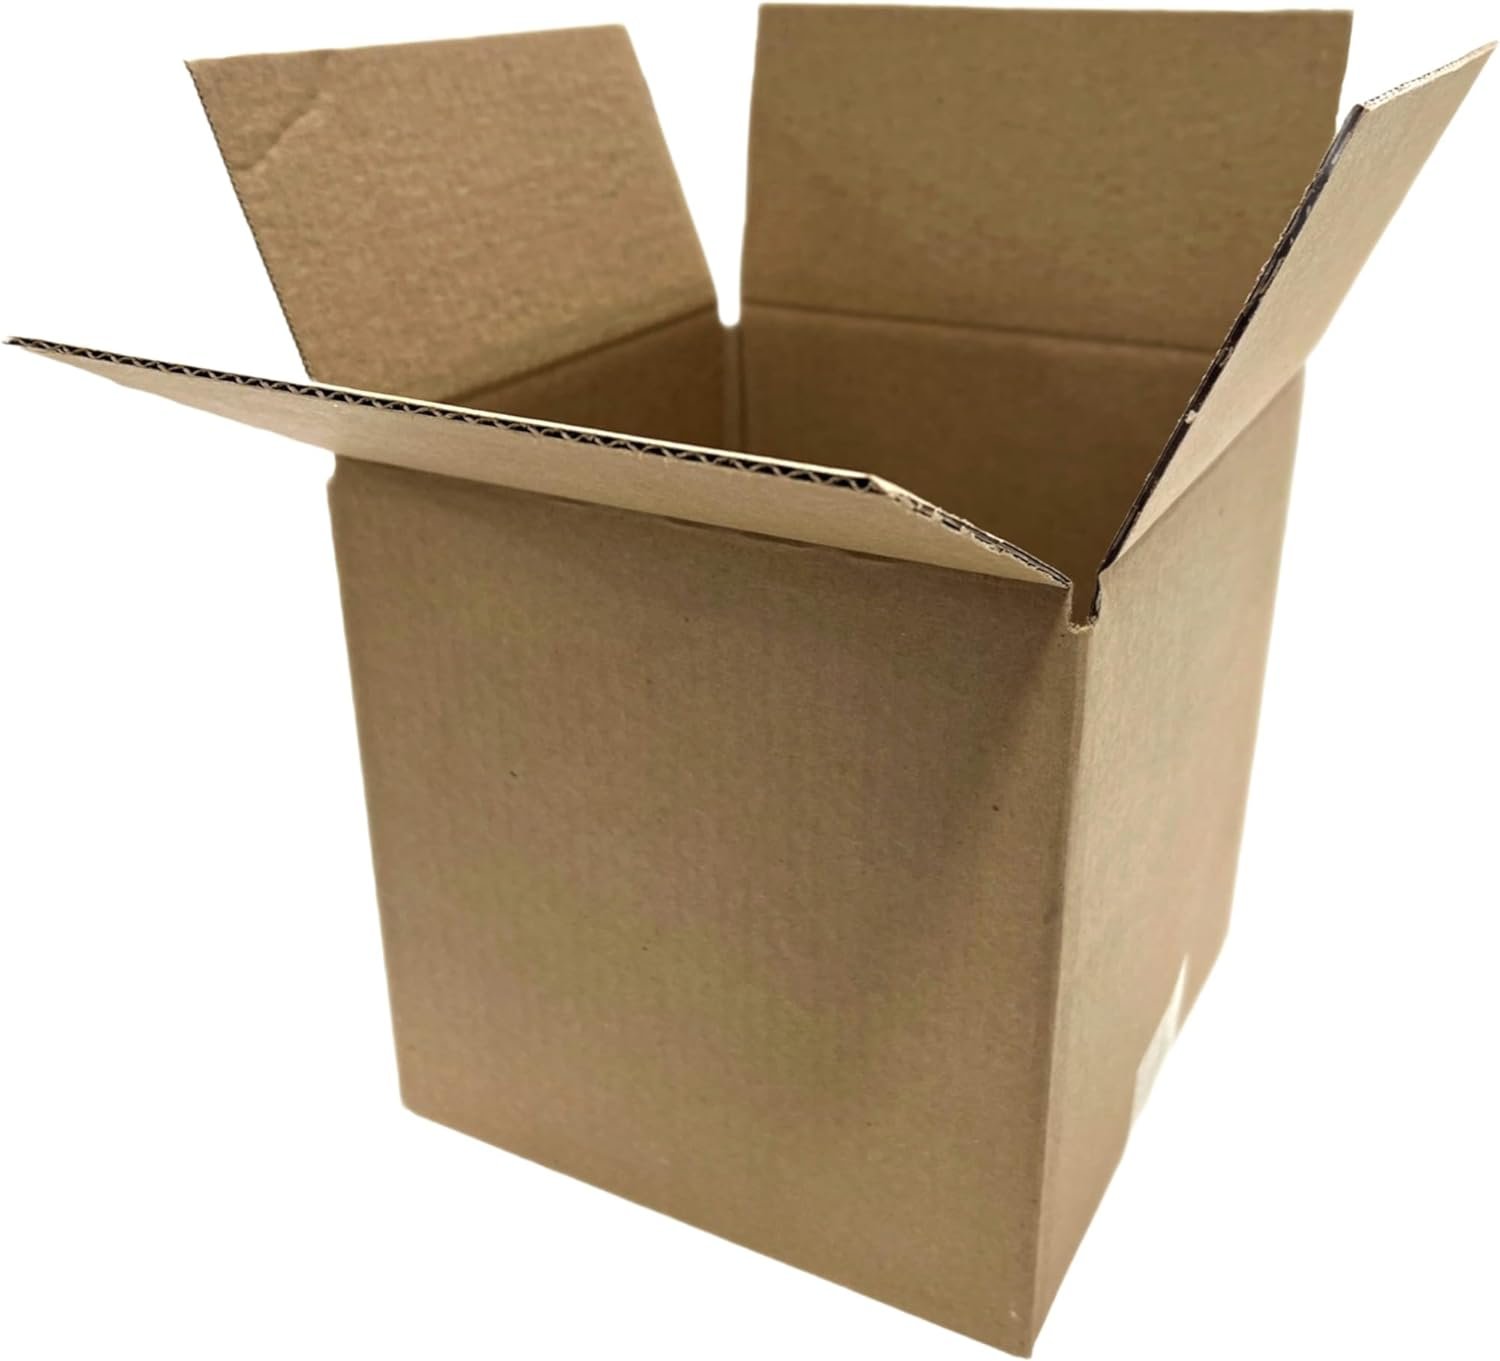 100 4x4x4 Cardboard Paper Boxes Mailing Packing Shipping Box Corrugated Carton